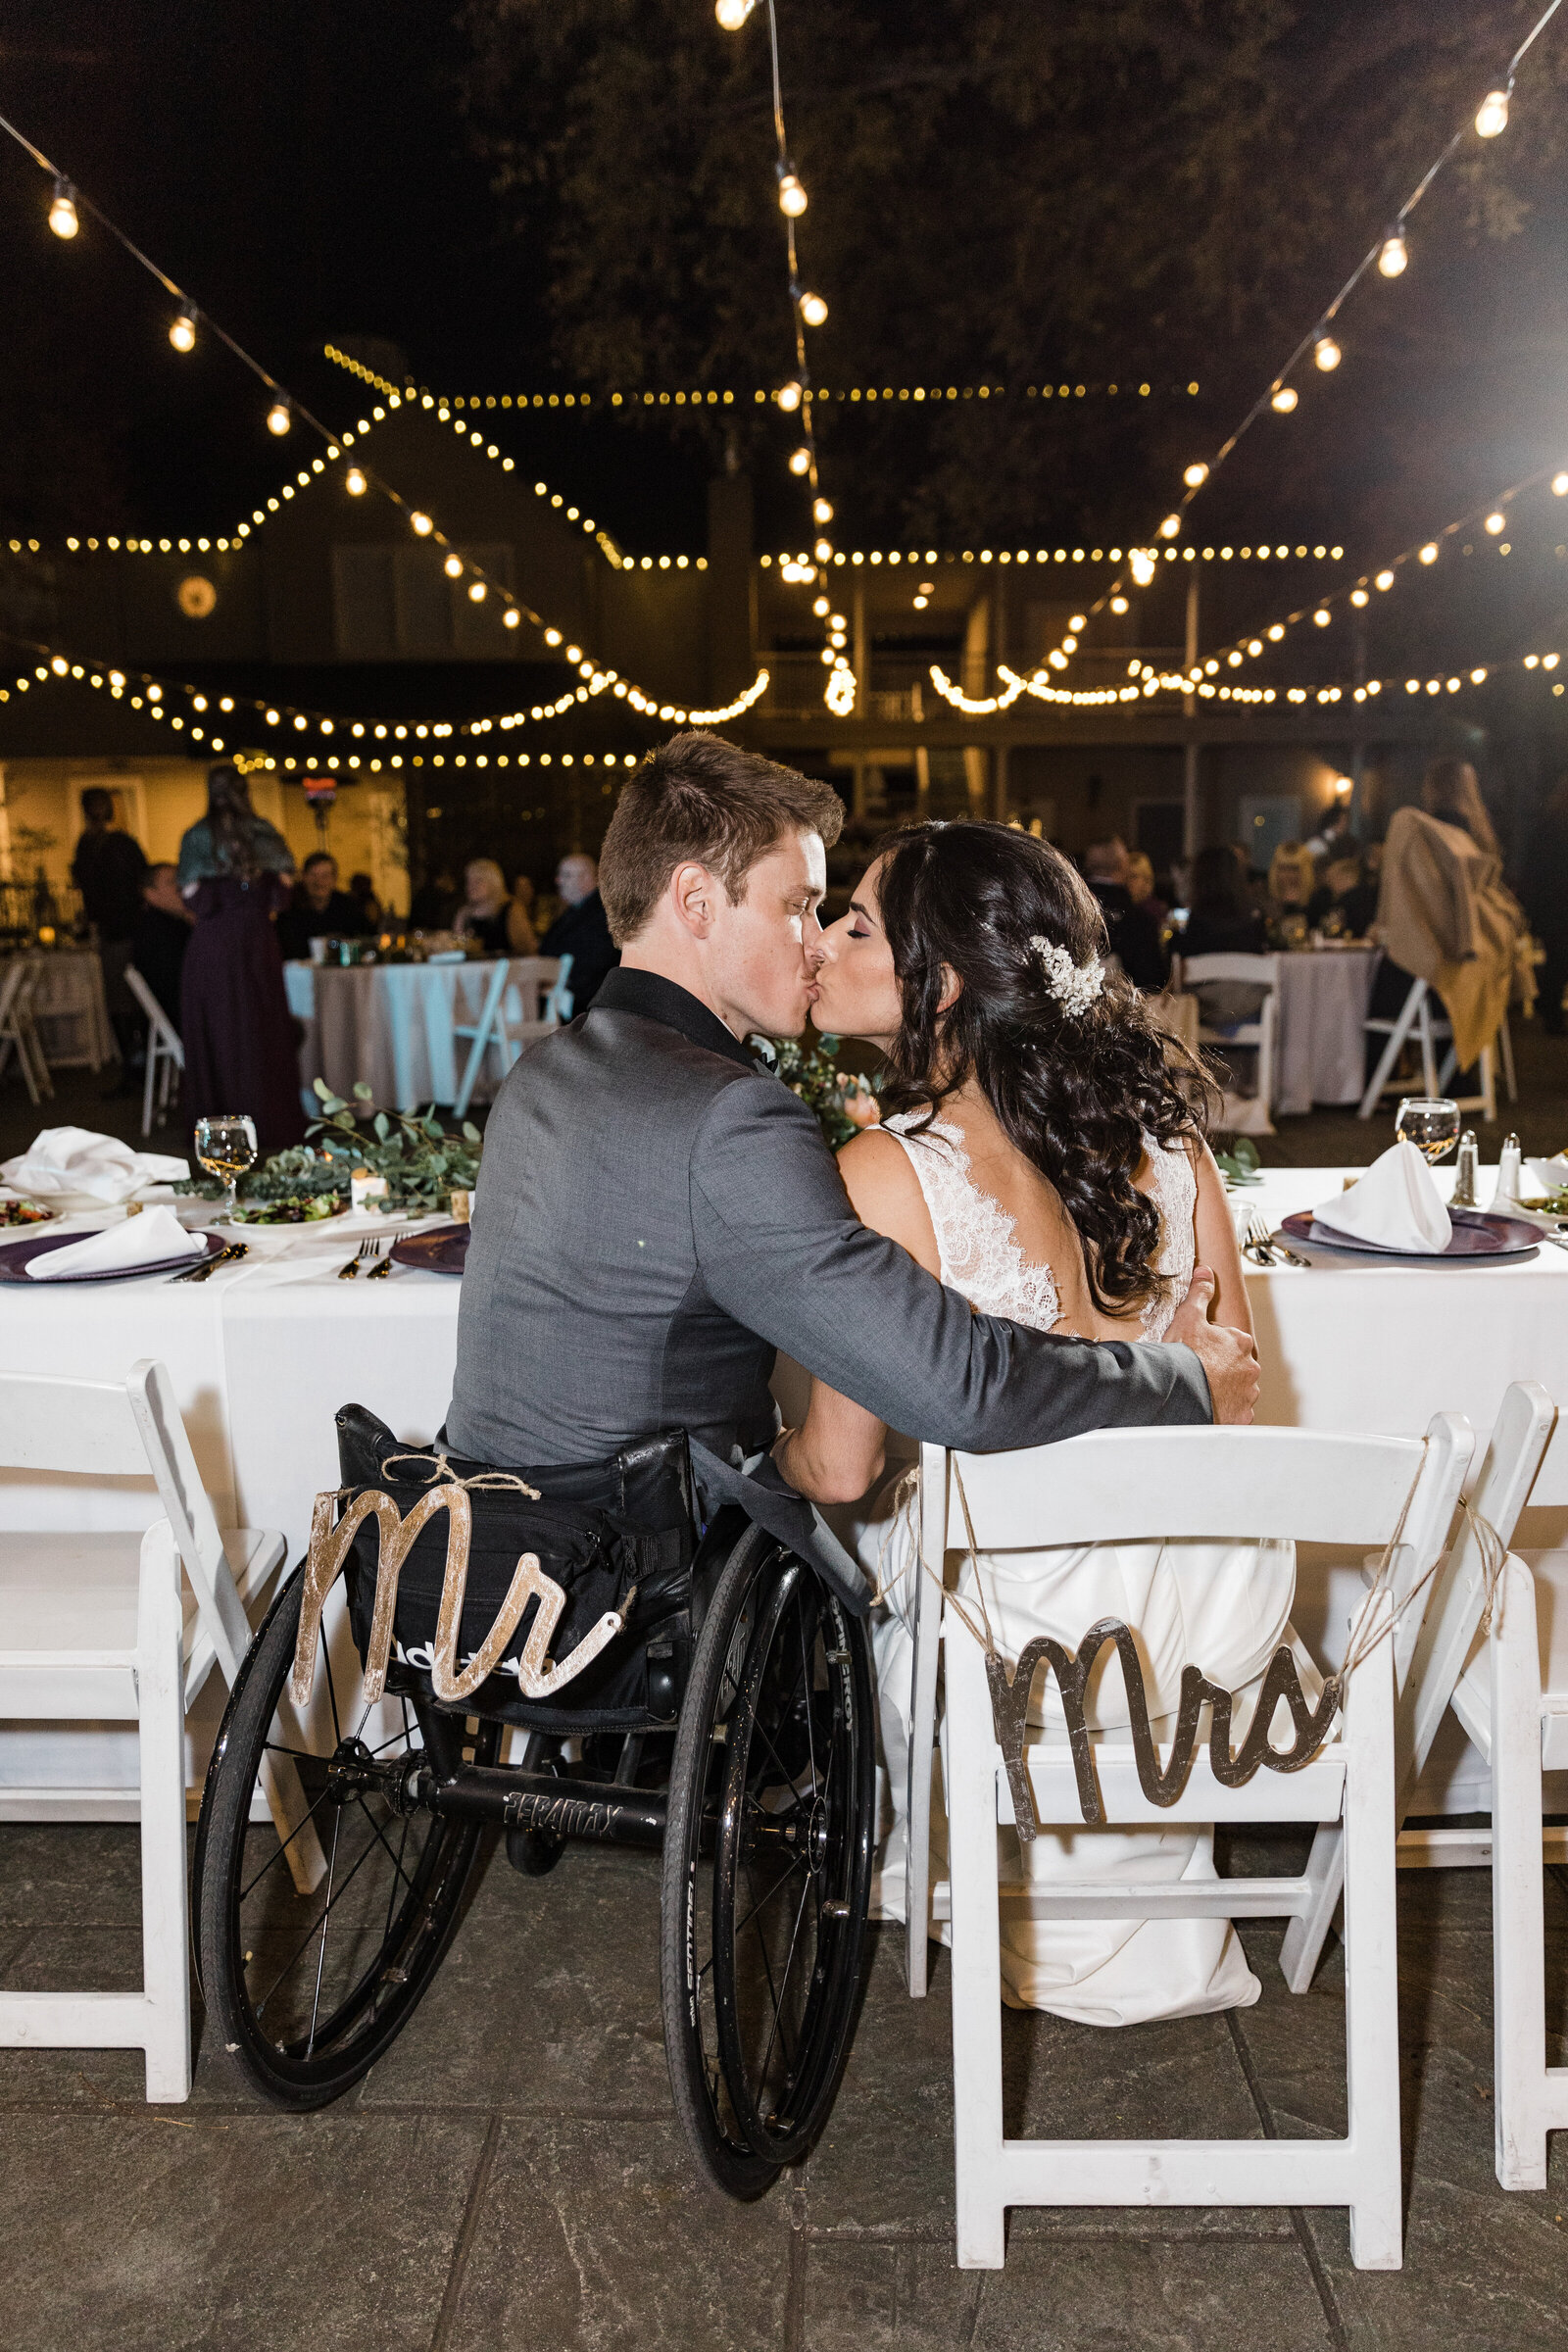 A bride and groom sharing a kiss at their wedding reception head table at the Sanford House in Arlington, Texas. The bride is on the right and is wearing a white dress and her chair has a "Mrs." sign hanging from it. The groom is on the left and is wearing a suit and sitting in a wheelchair, which has a "Mr." sign hanging off of it. Strings of cafe lights, wedding guests, and reception tables can be seen in the background.